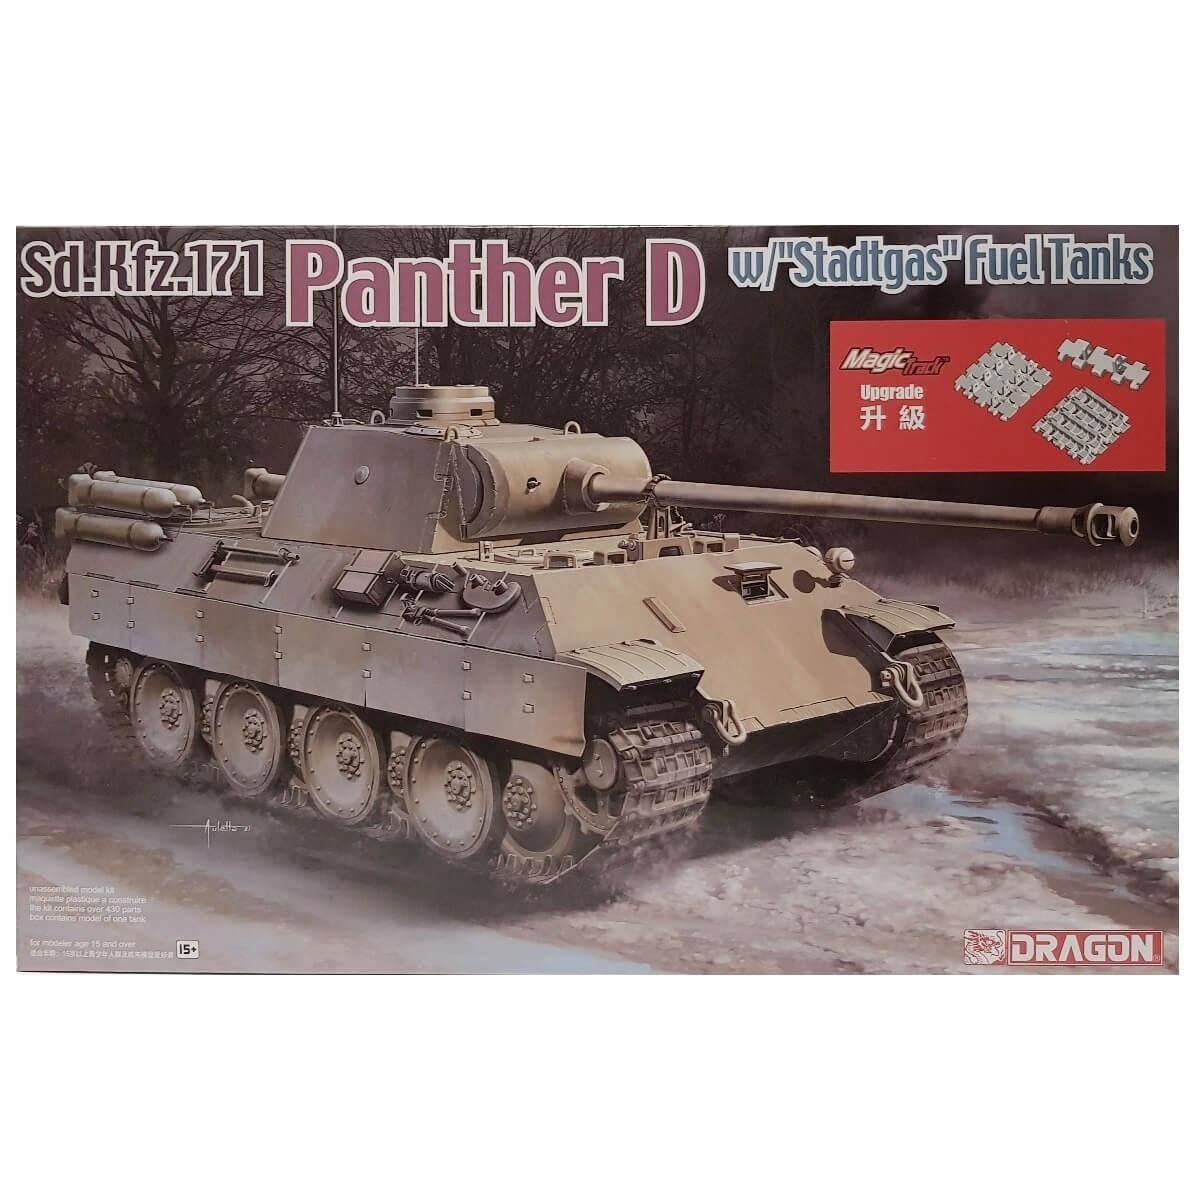 1:35 Sd.Kfz. 171 Panther D with Stadtgas Fuel Tanks - DRAGON